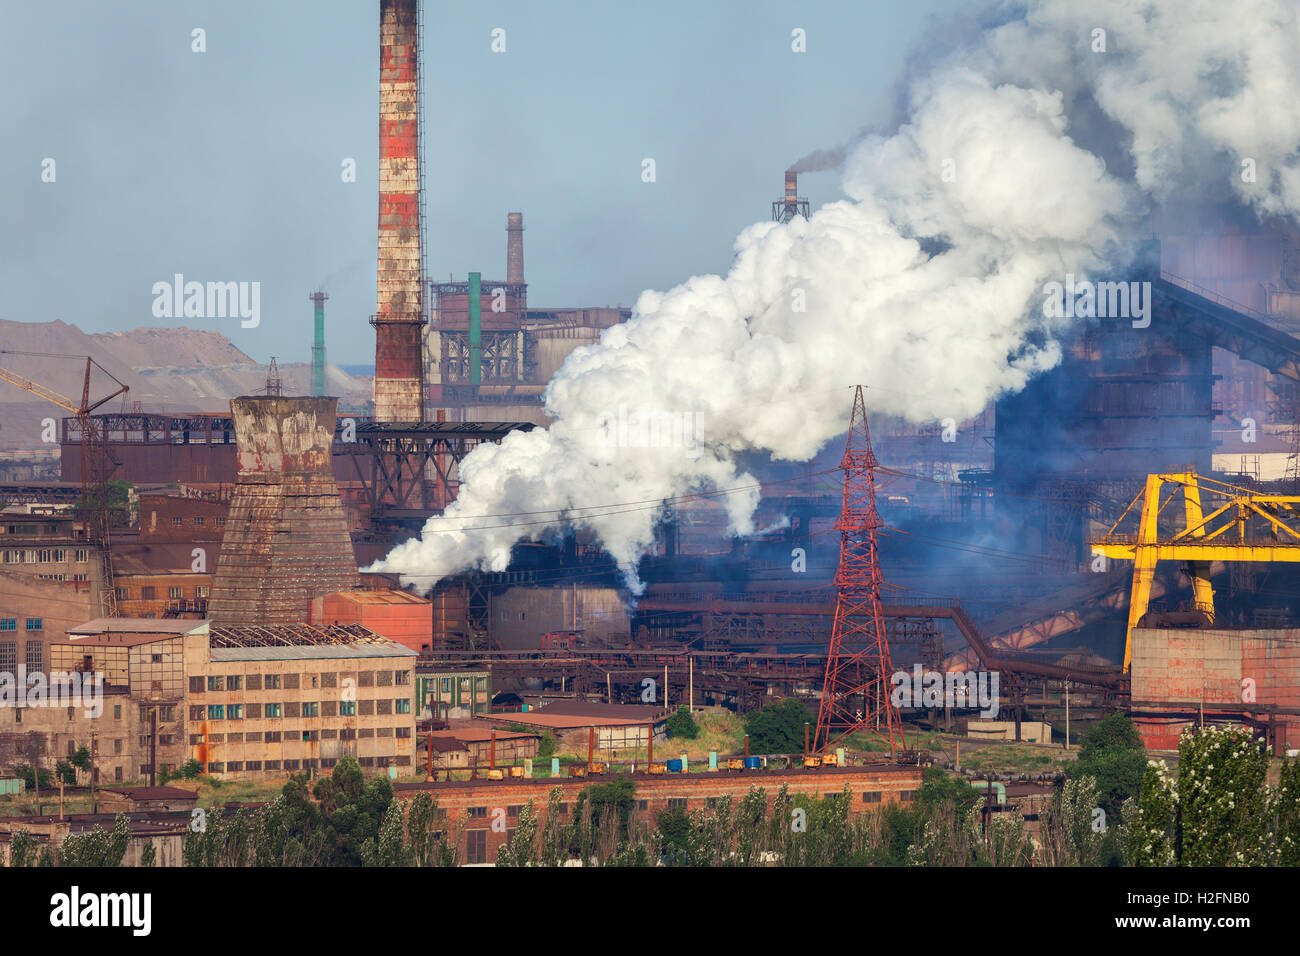 Steel mill, Metallurgy plant. Heavy industry factory. Steel factory with smog. Pipes with smoke. Metallurgical plant. steel work Stock Photo